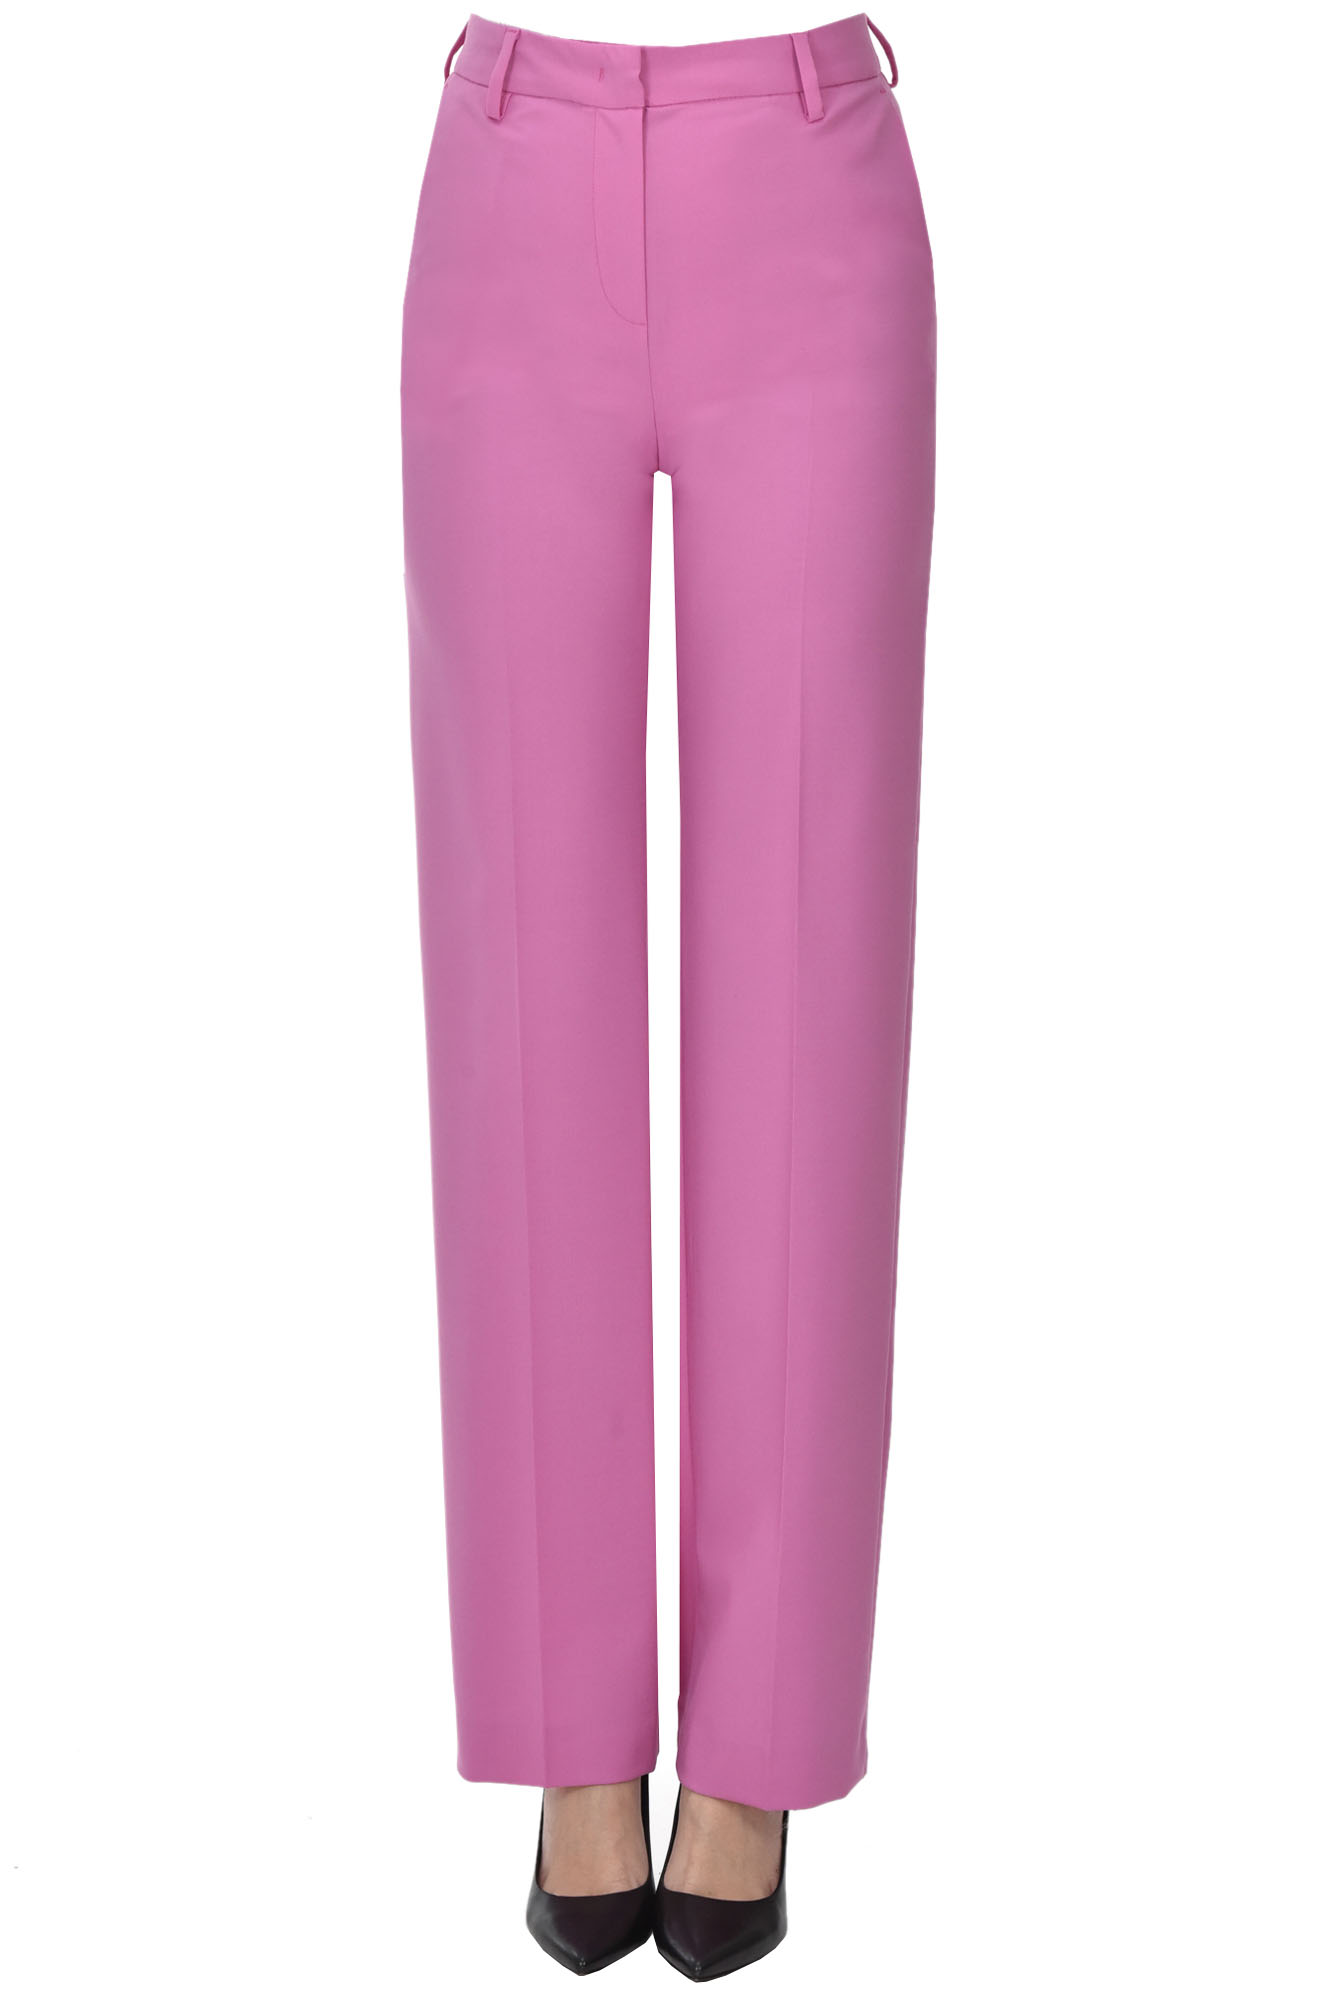 Pt Torino Ambra Trousers In Pink